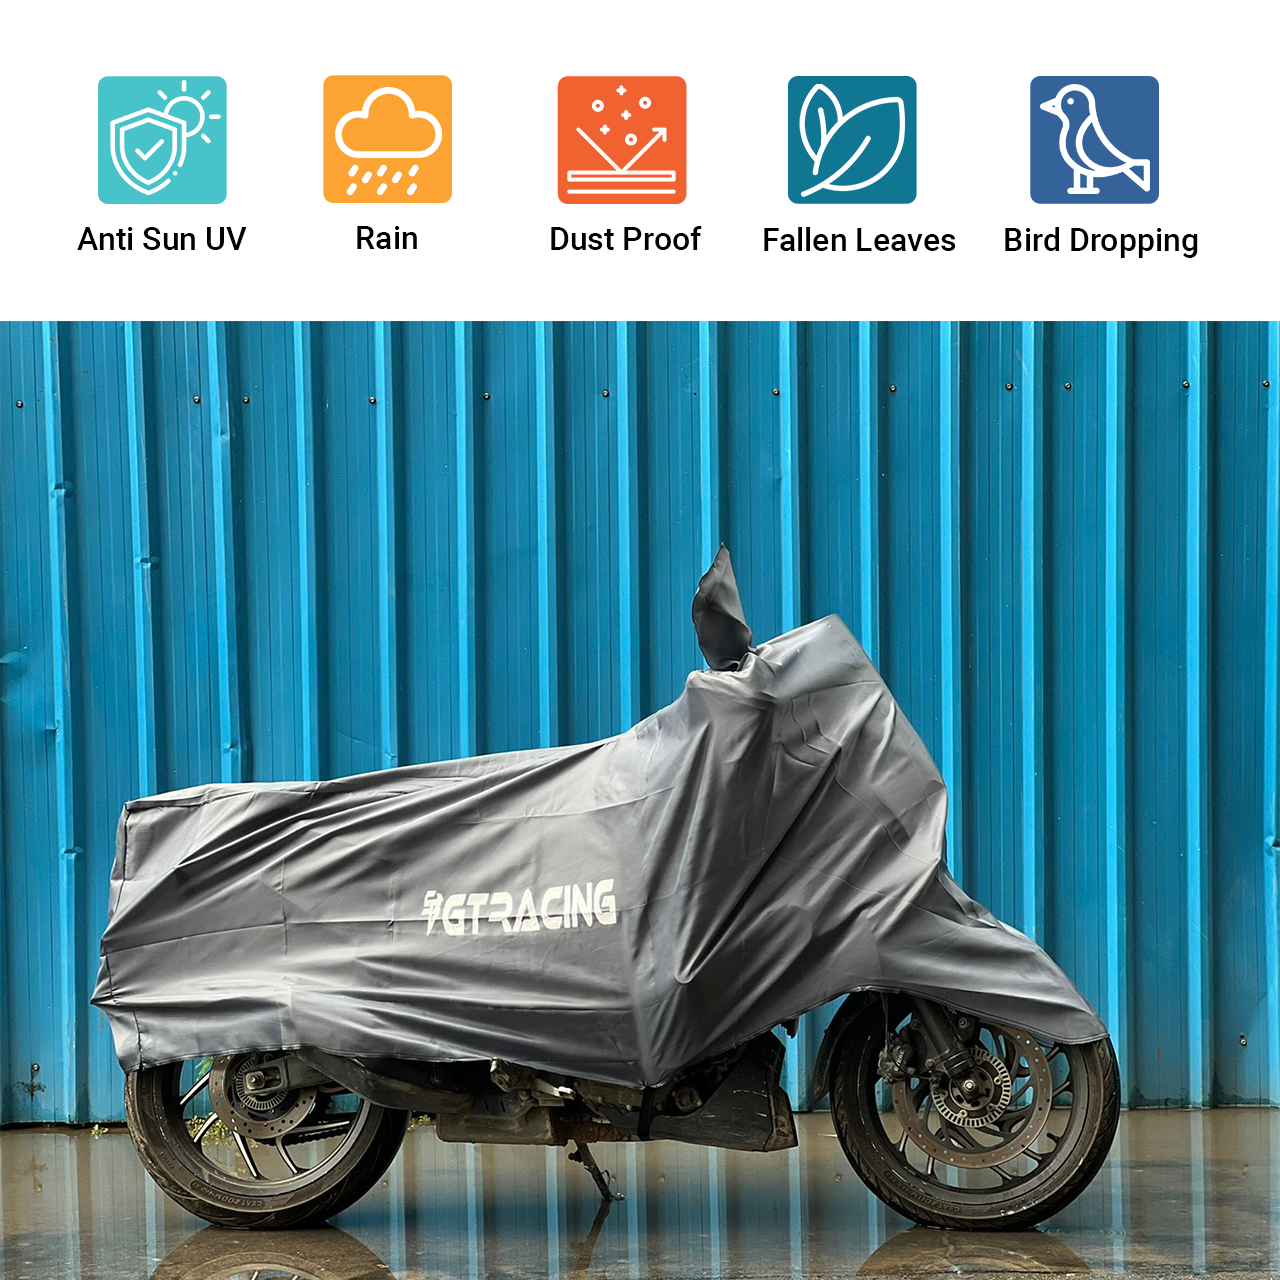 Steelbird Bike Cover GT Racing UV Protection Water-Resistant & Dustproof (Silver Matty), Bike Body Cover With Carry Bag (All Scooter Activa Electric Scooty Size)